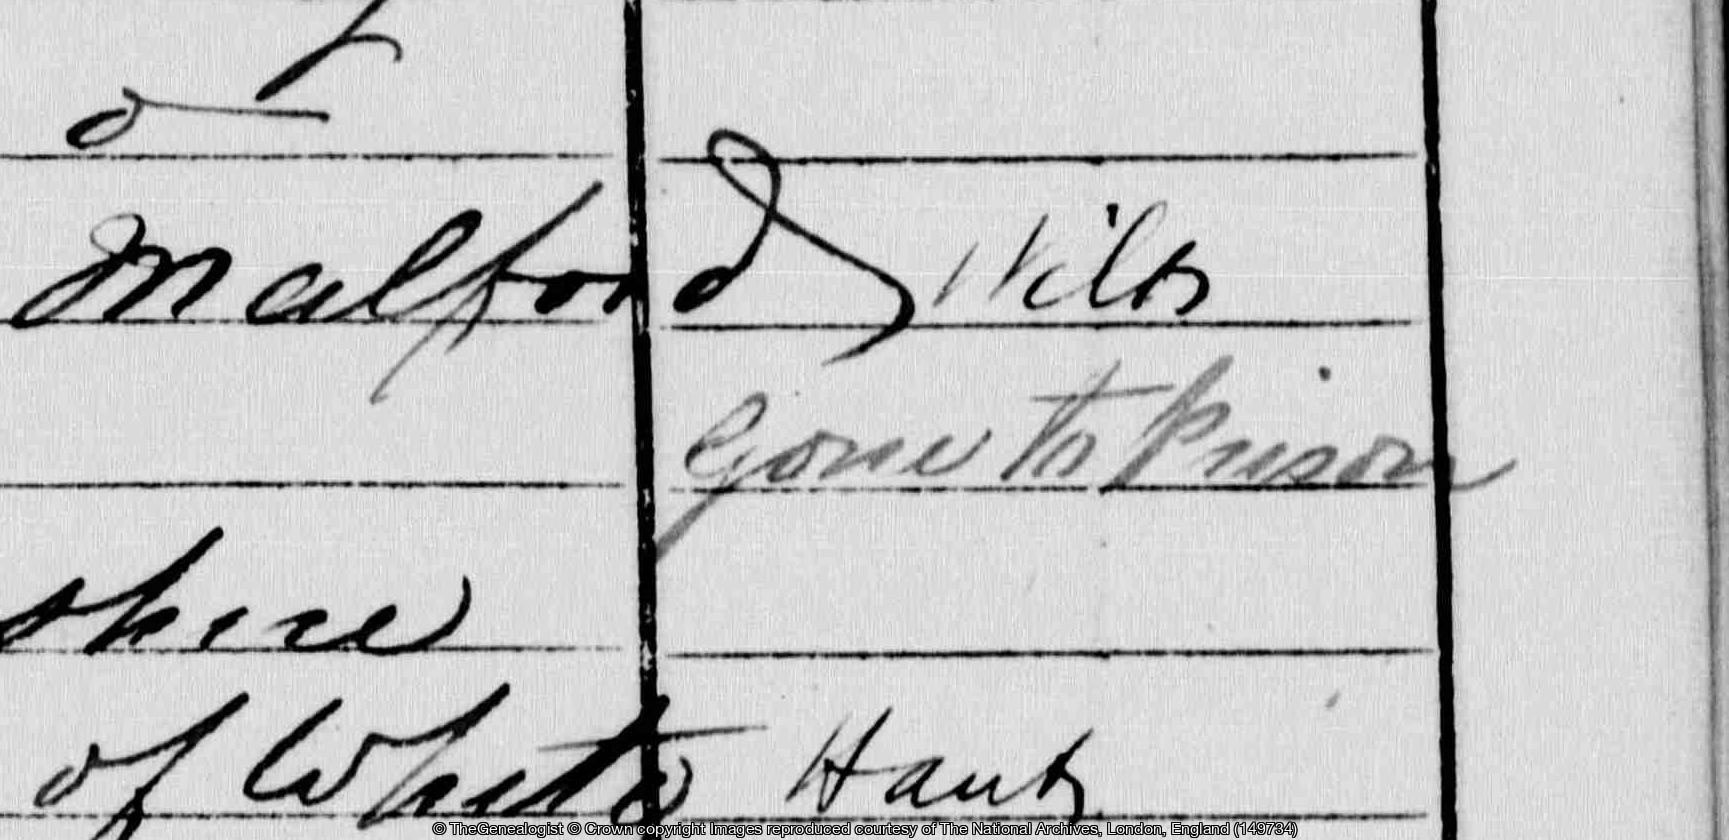 1871 Middlesex census of Laleham, this resident had: Gone to Prison.